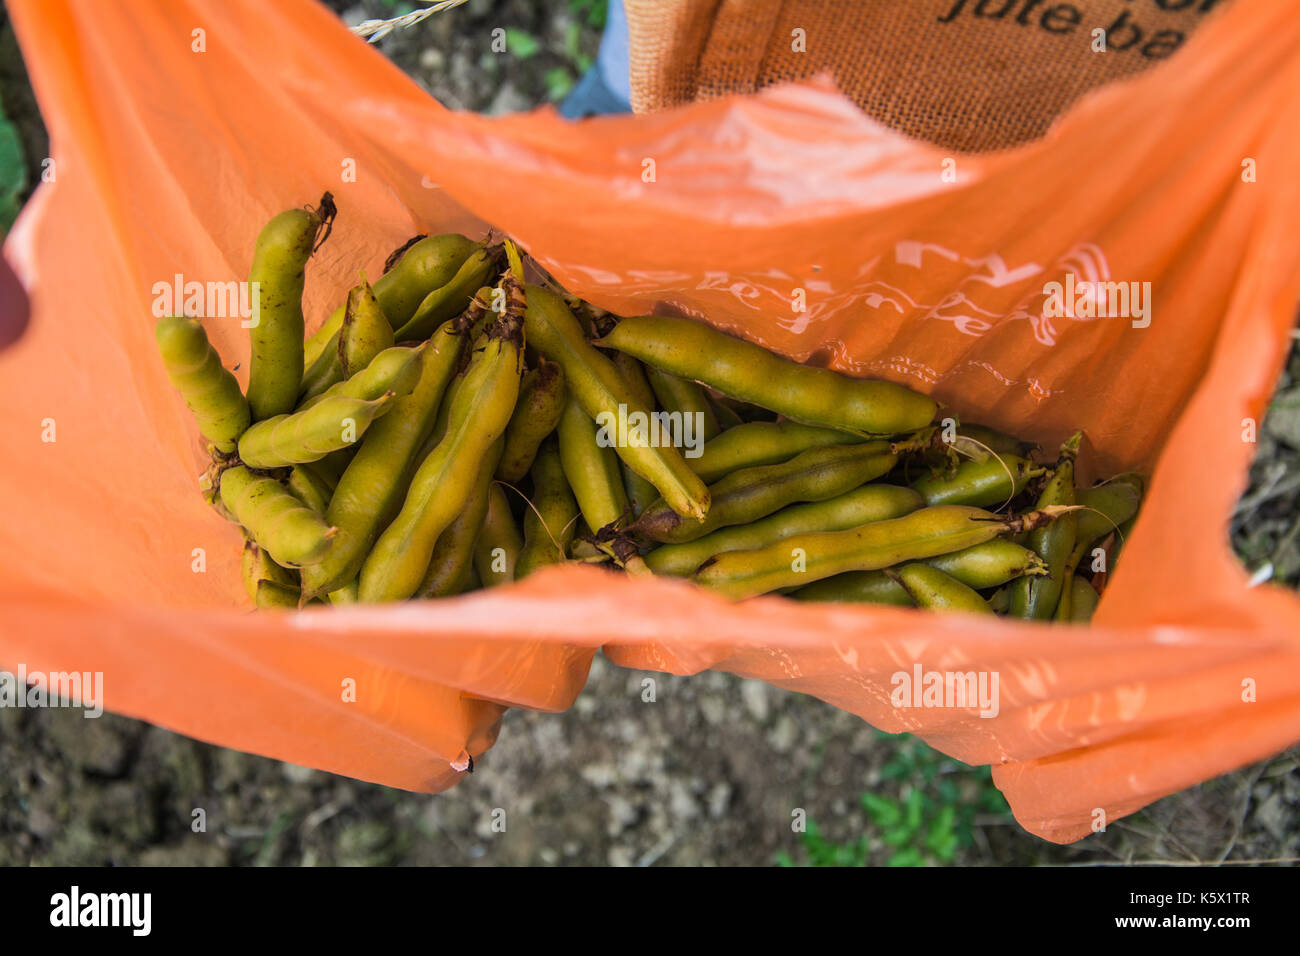 A woman holding open a bag of freshly picked Broad Beans (Vicia faba, fava beans), Shropshire, UK Stock Photo